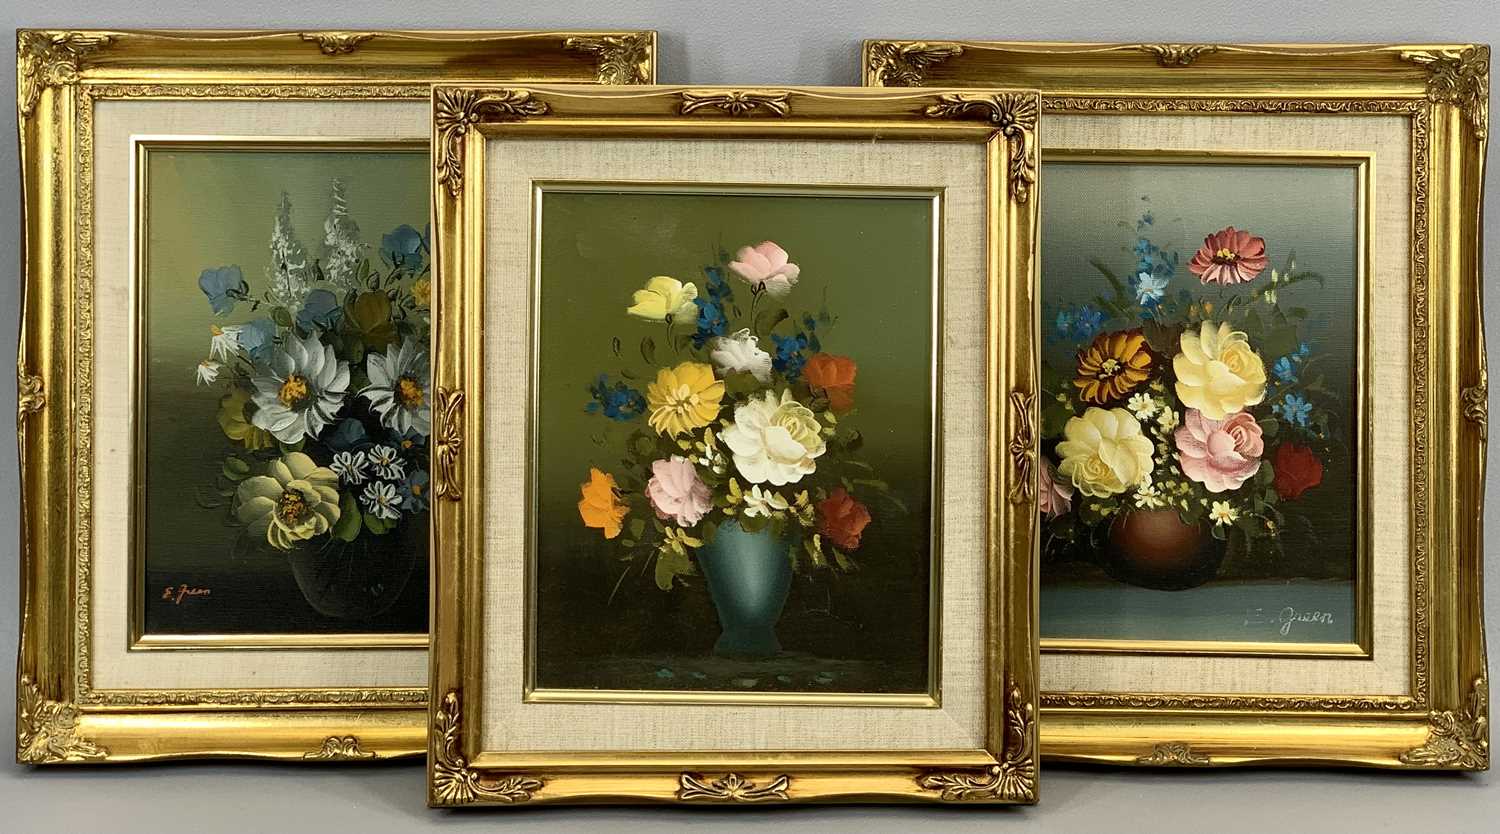 HEATHER CRAIGMILE b.1979 oils on canvas, a pair - Still life of flowers, signed, 23 x 18cms, E GREEN - Image 3 of 9